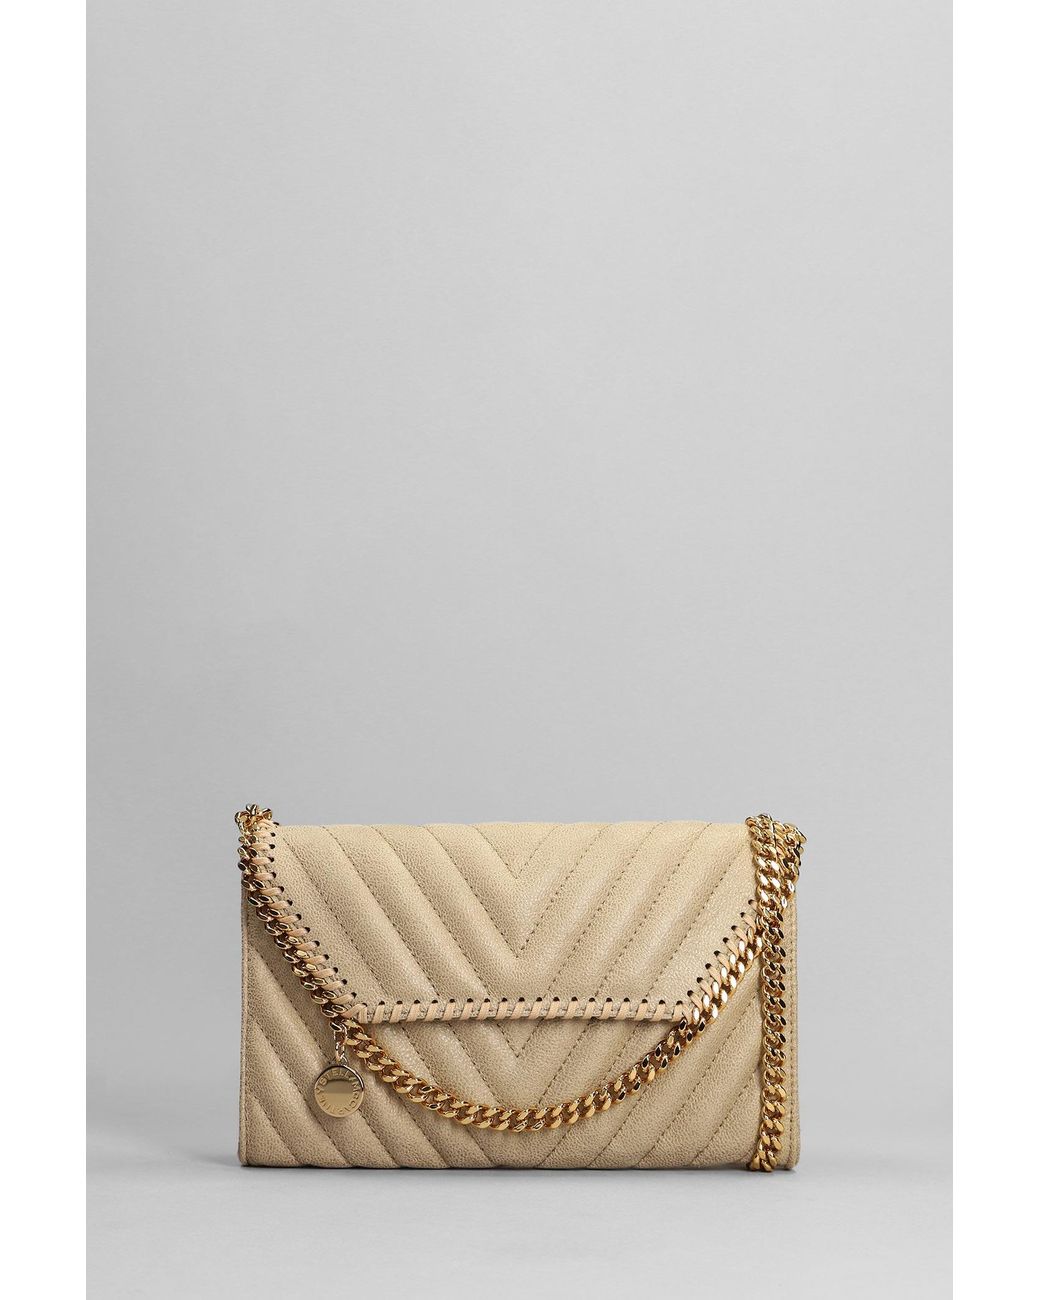 Stella McCartney Falabella Tote In Beige Faux Leather in Natural | Lyst